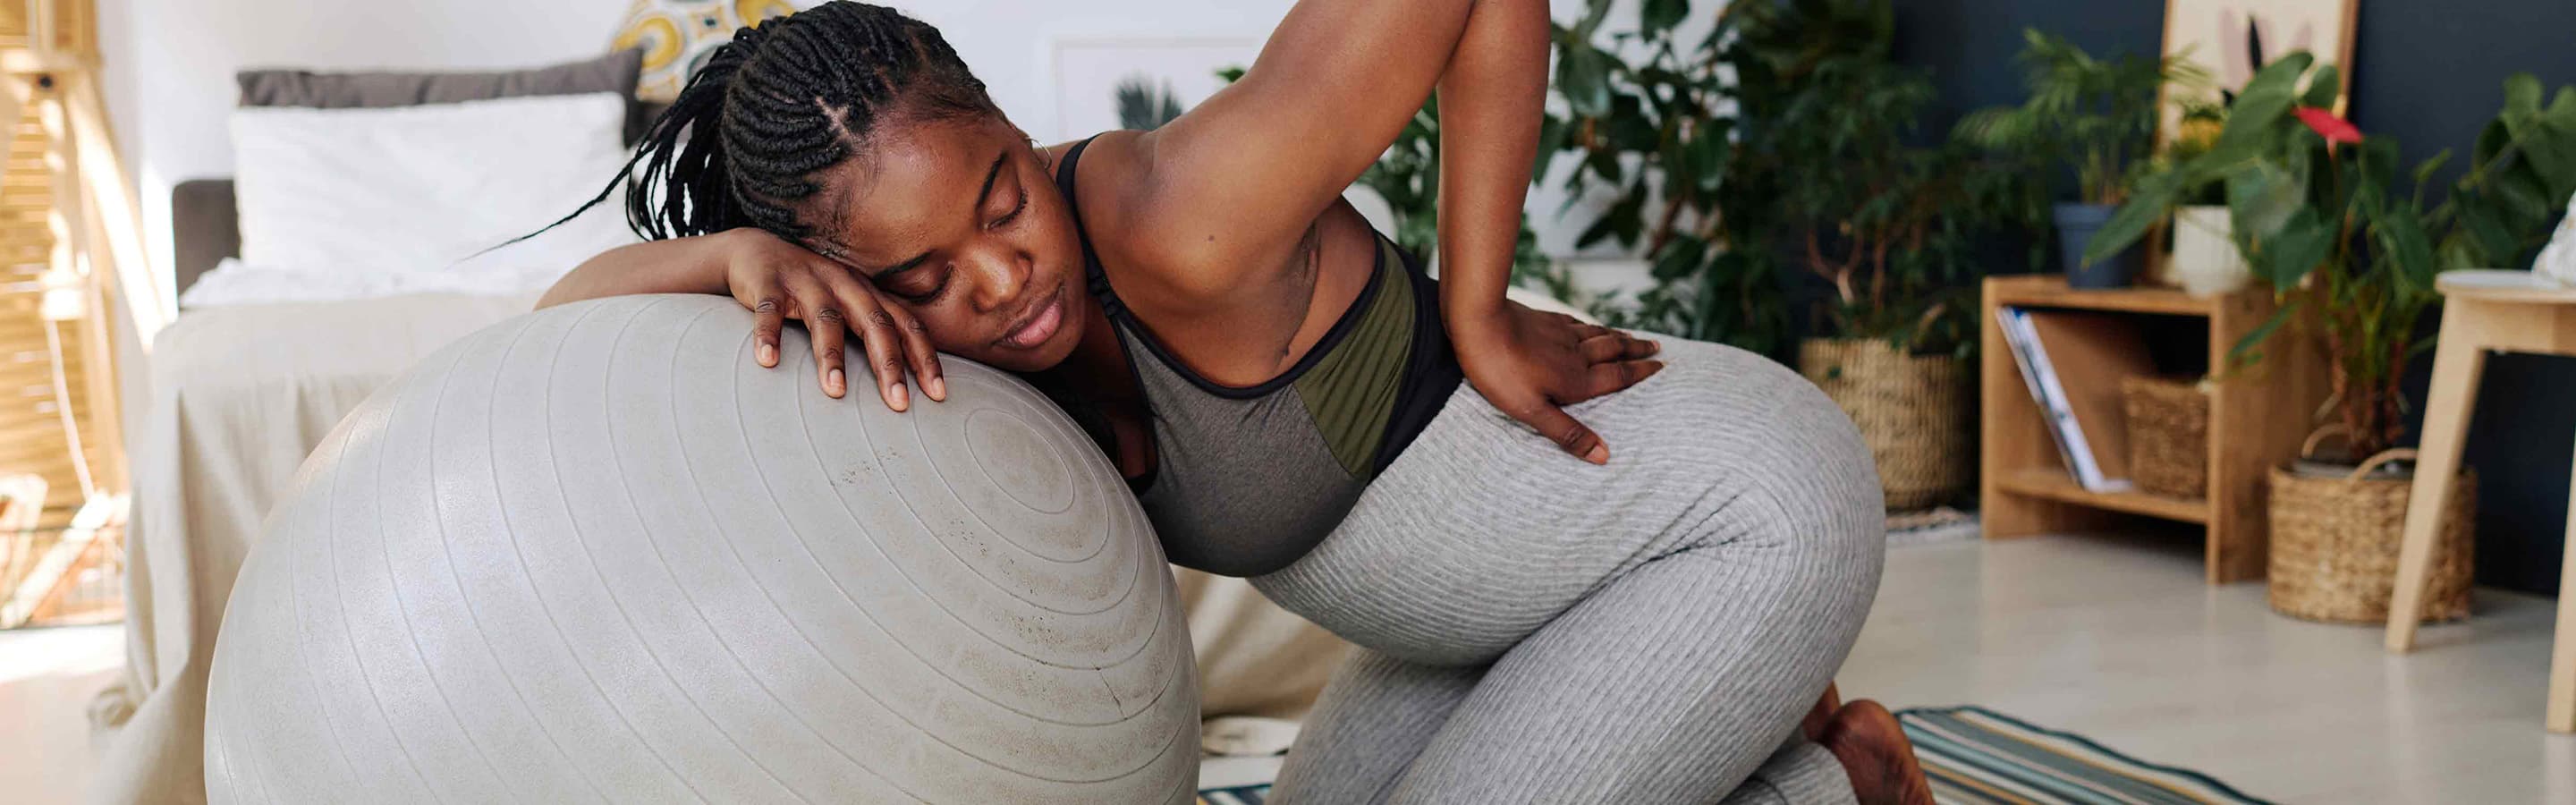 Woman in exercise gear laying on a gray exercise ball